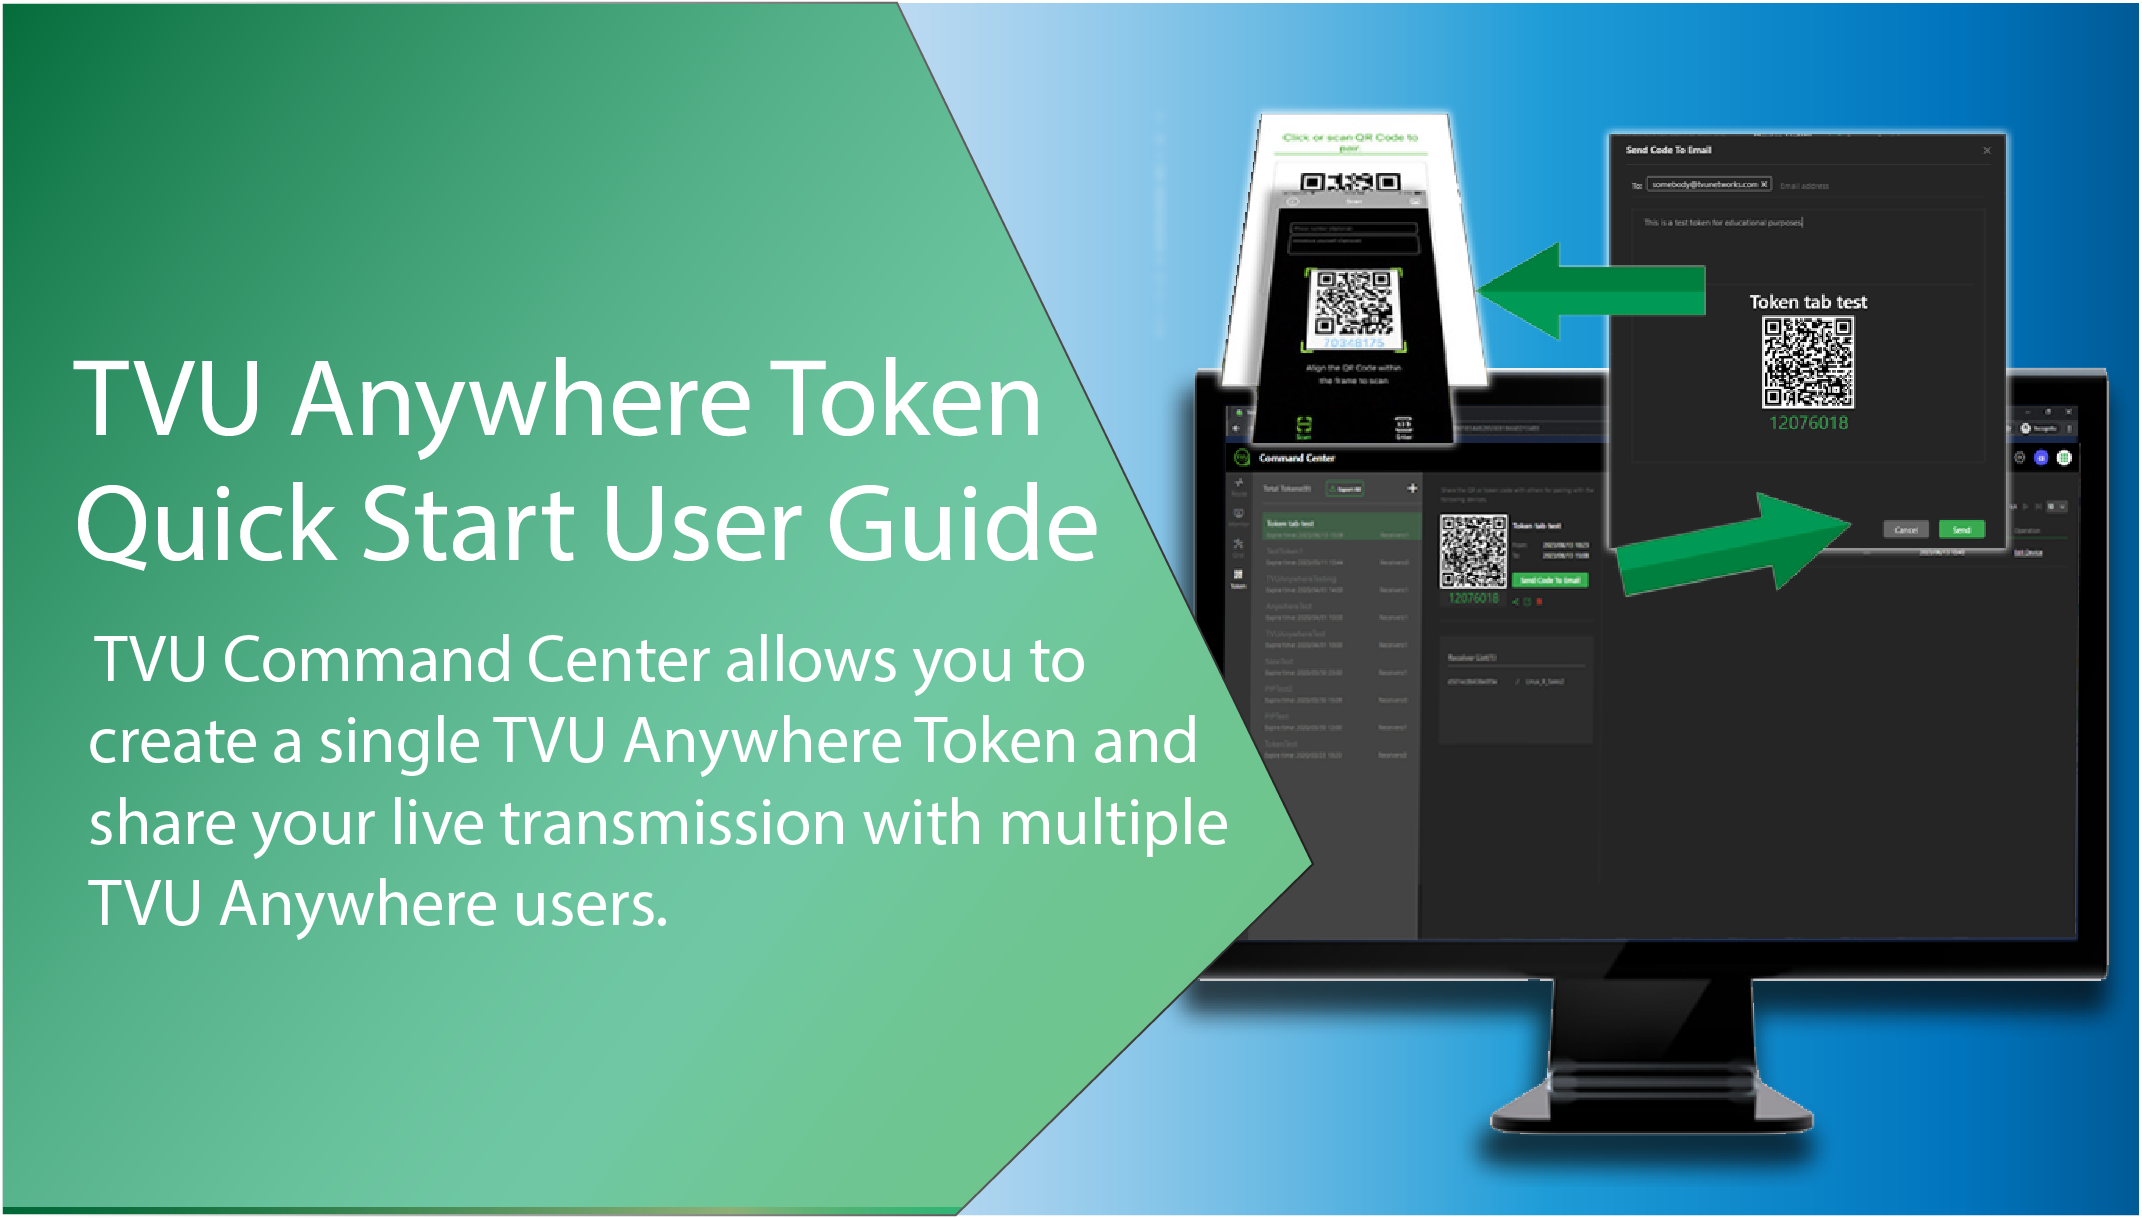 TVU Anywhere Token QSUG Featured image